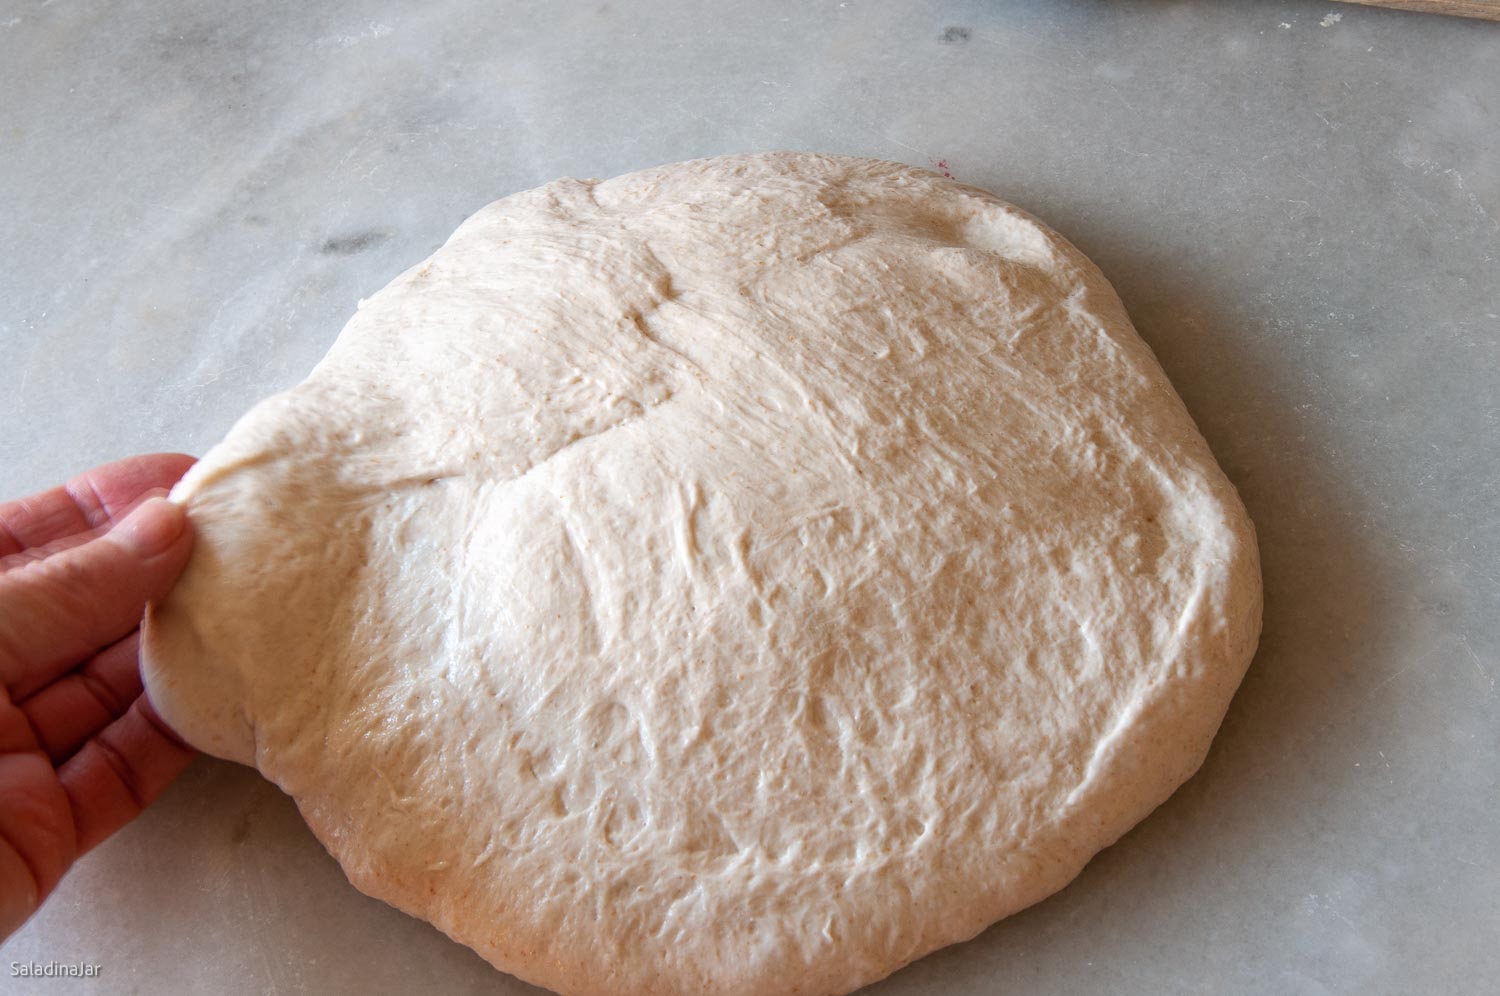 after the bench rest, flipping the dough and reshaping it.